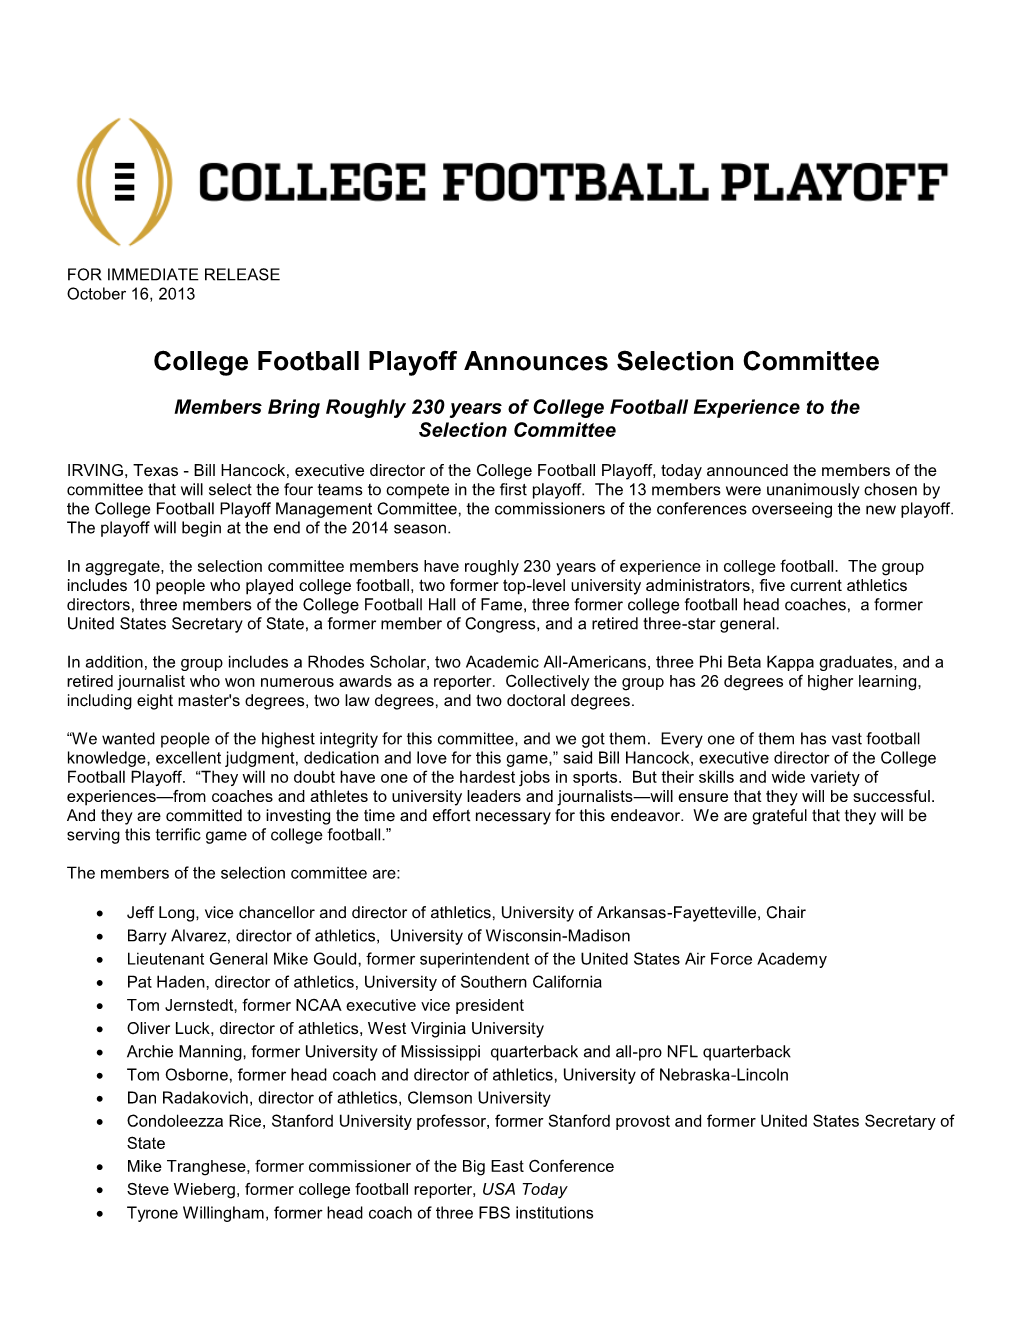 College Football Playoff Announces Selection Committee